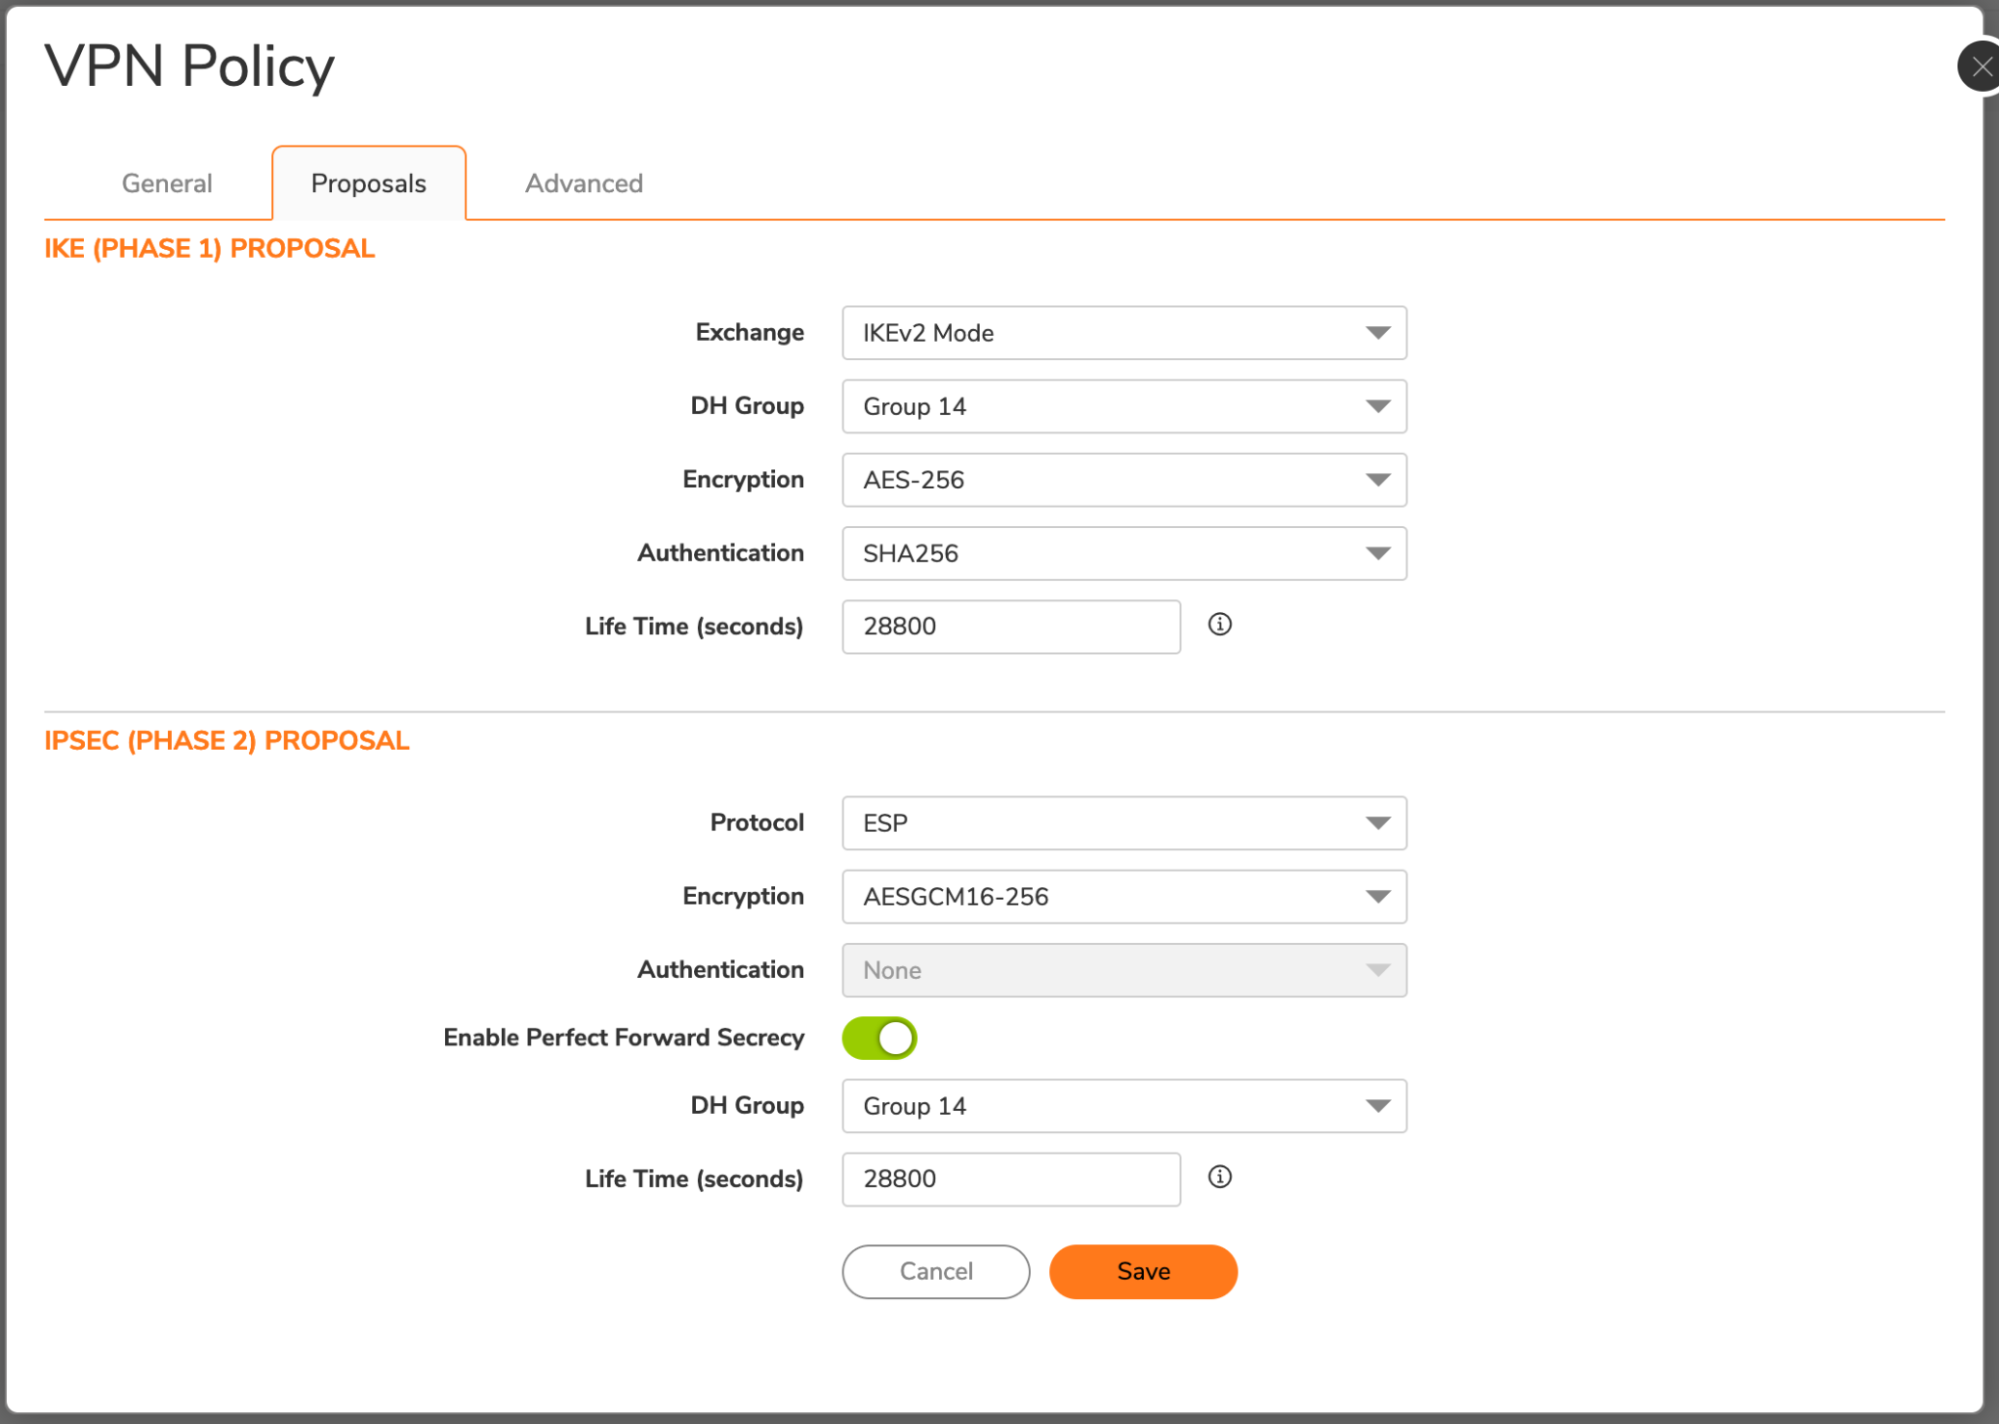 Configure a VPN policy on your SonicWall device